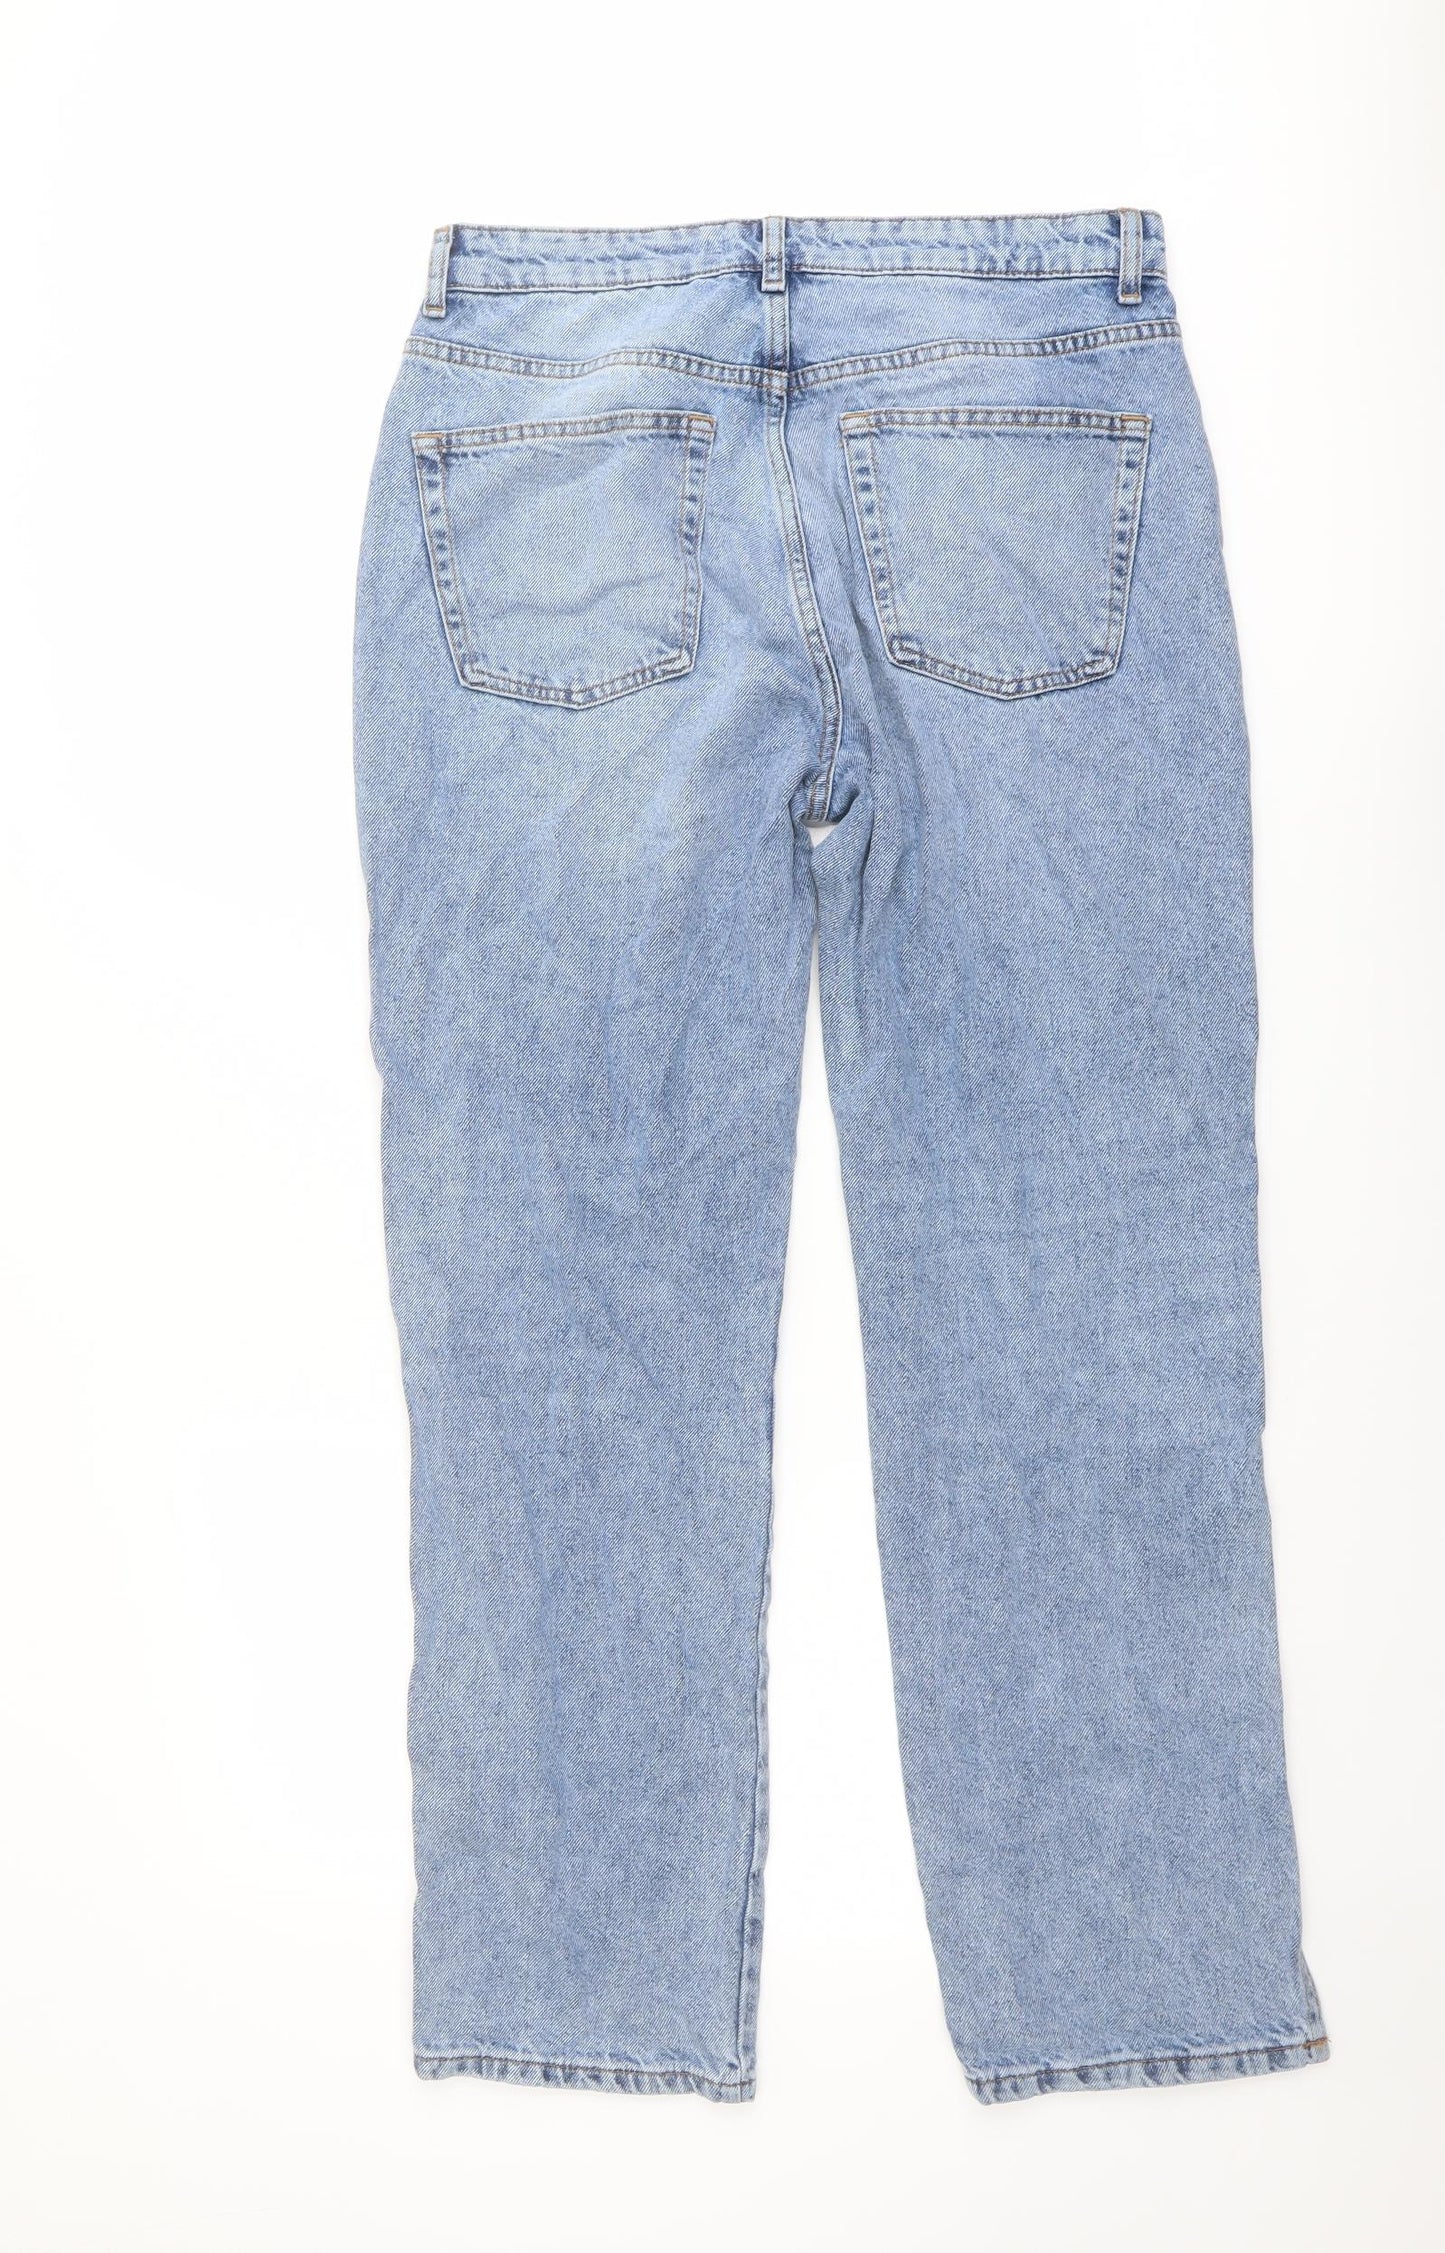 Denim & Co. Womens Blue Cotton Straight Jeans Size 14 L30 in Regular Button